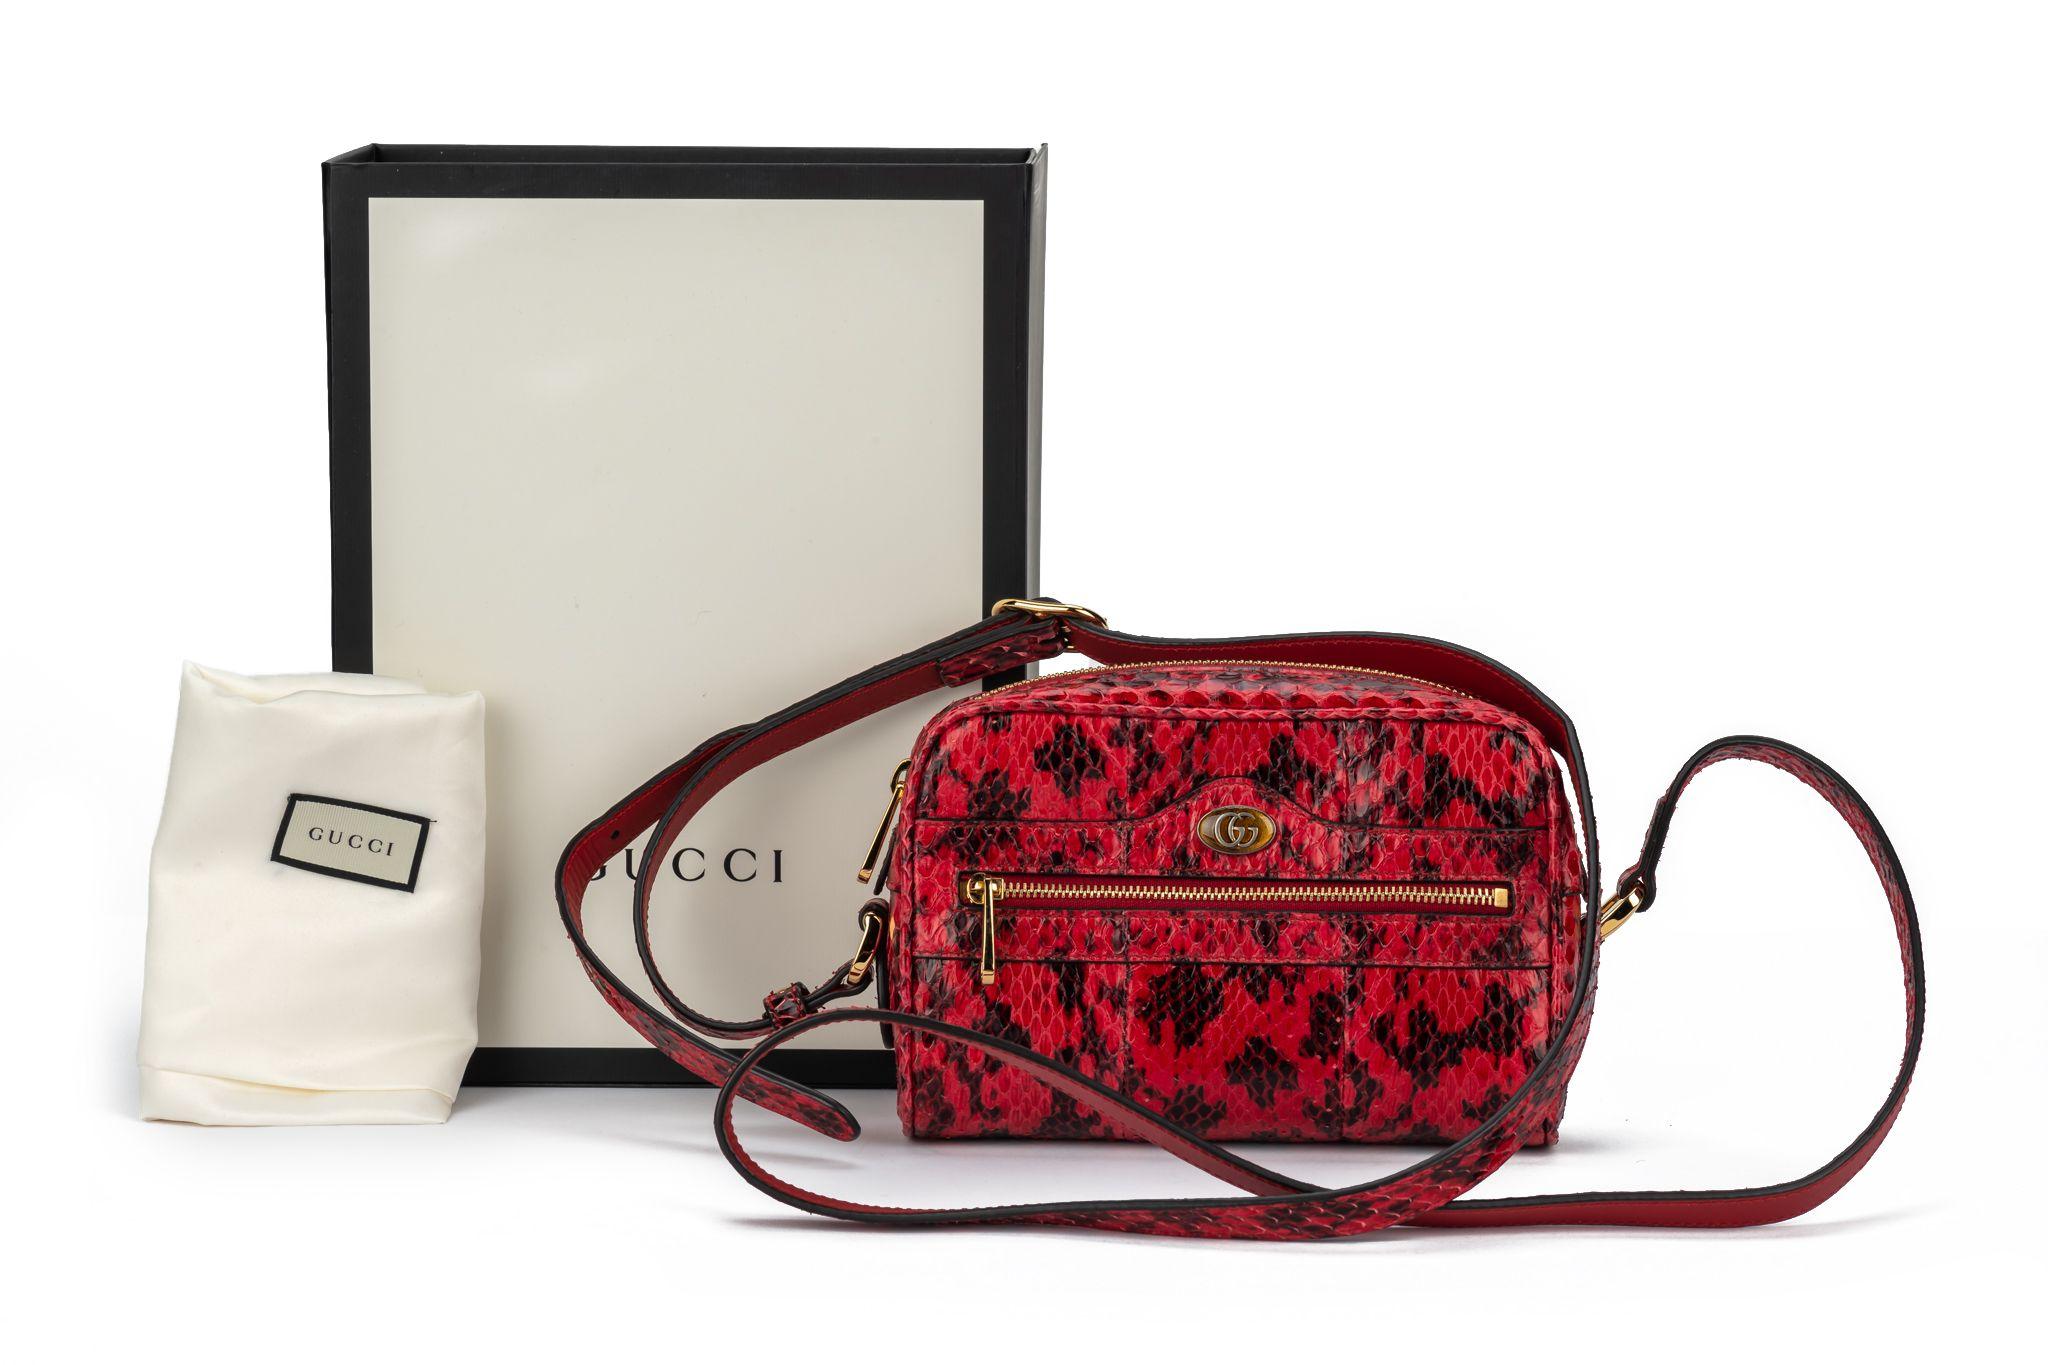 New GUCCI crossbody watersnake bag in red. The piece comes with an adjustable shoulder strap which measures 22.5 inches. Also it comes with the original box and dustcover.